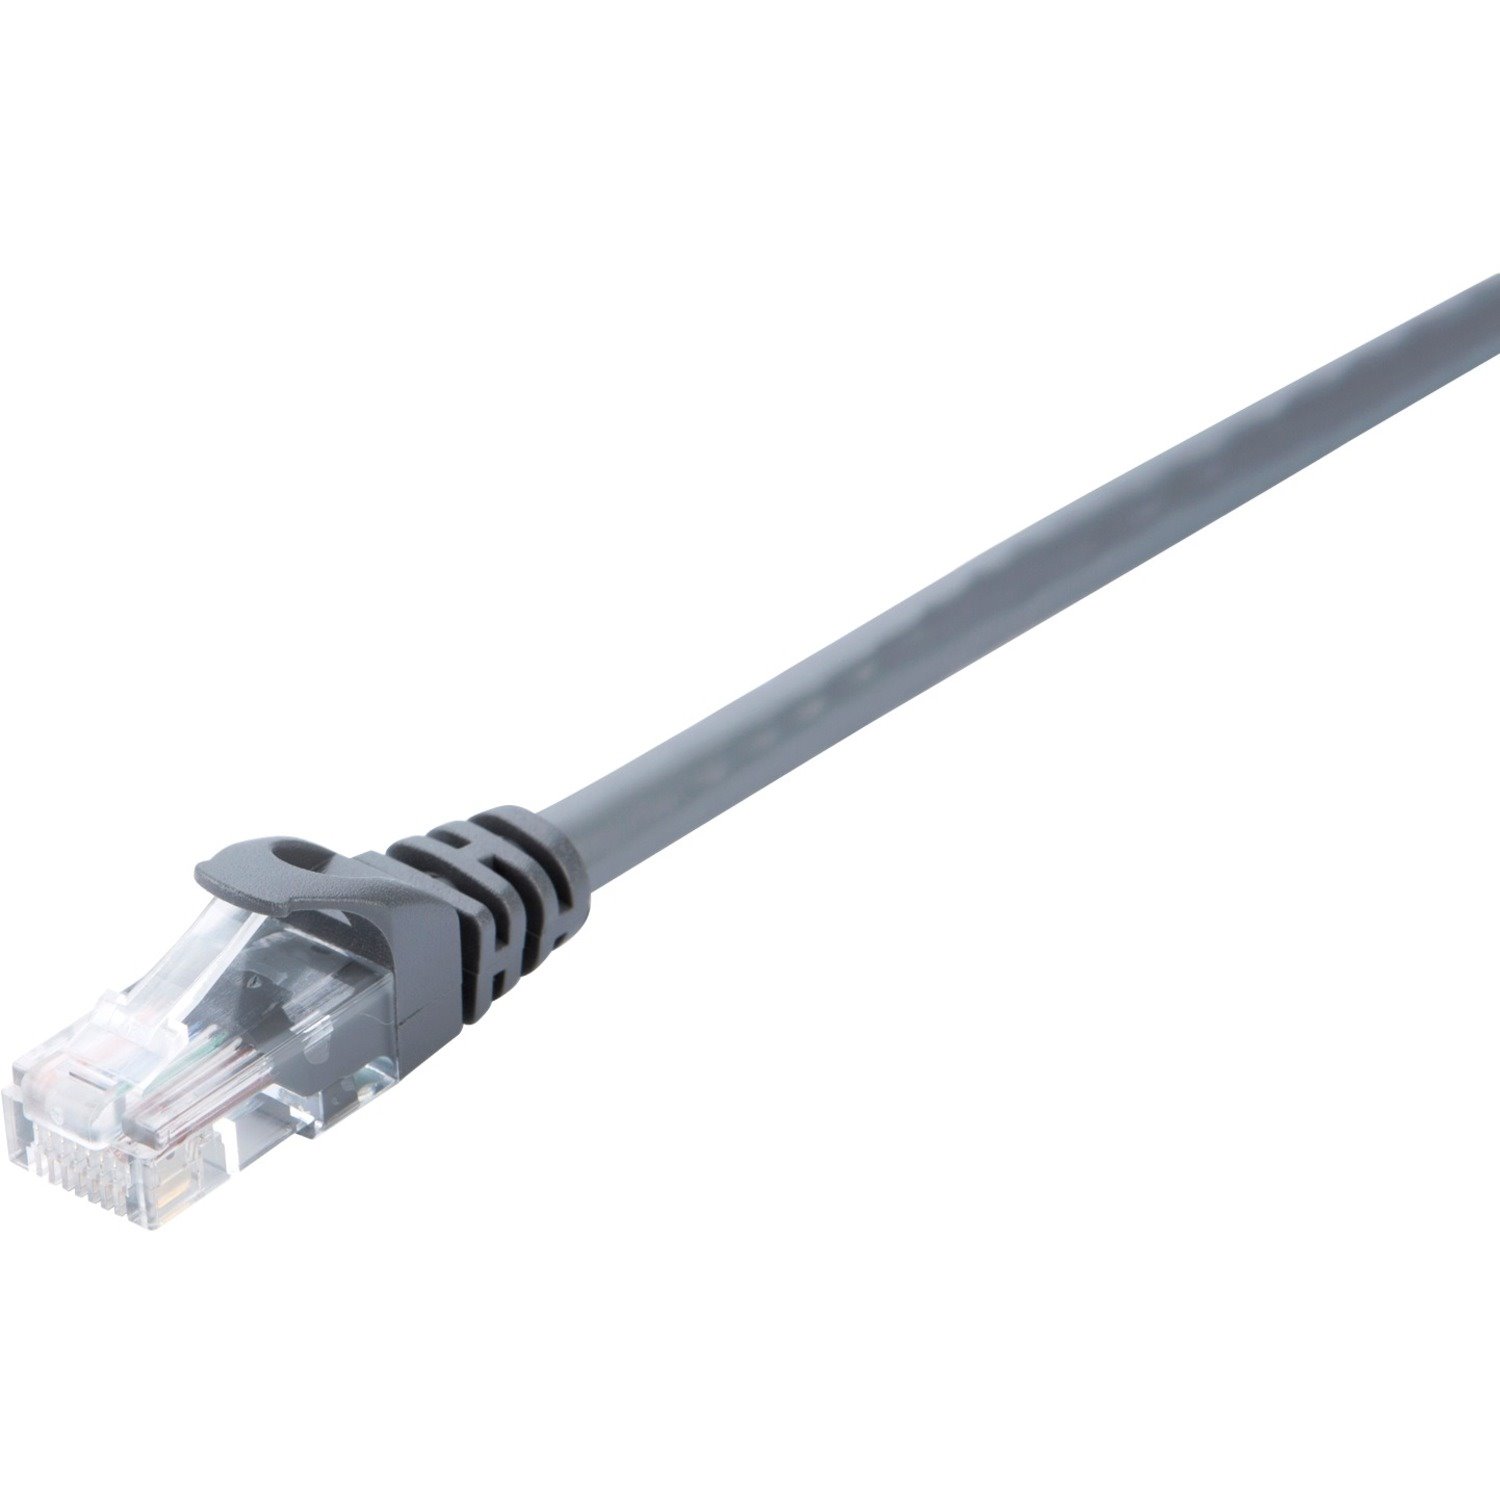 V7 Grey Cat6 Unshielded (UTP) Cable RJ45 Male to RJ45 Male 2m 6.6ft